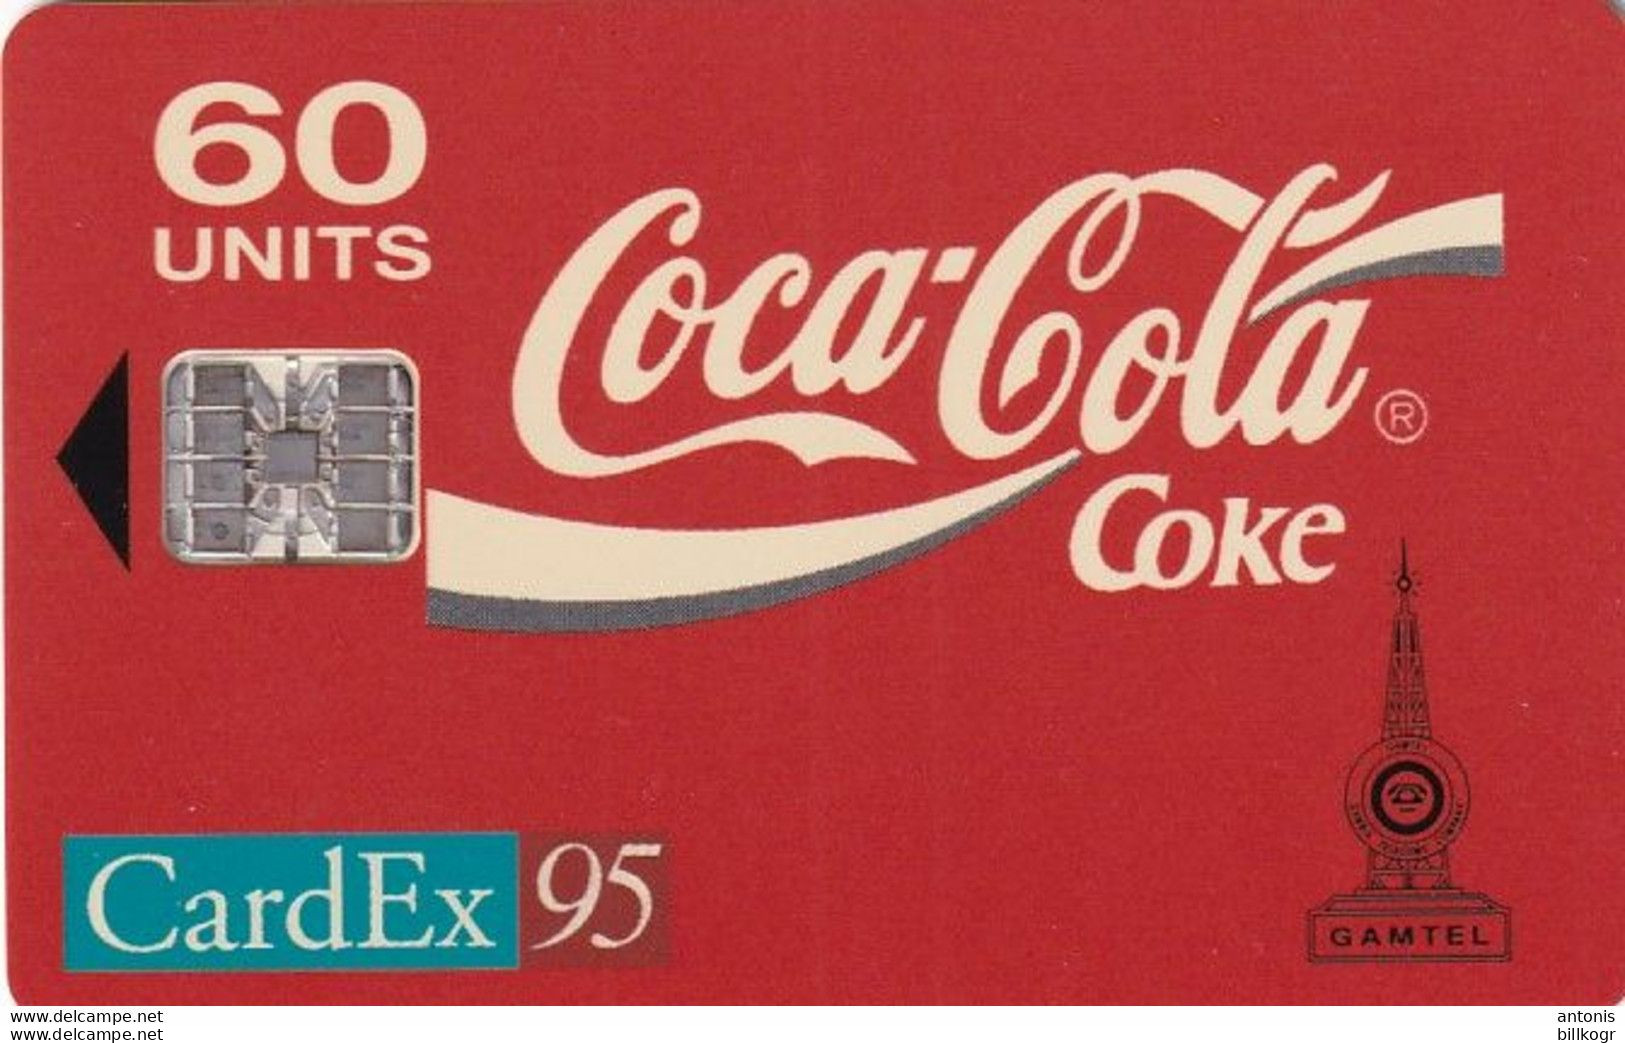 GAMBIA - Coca Cola, CardEx 95 Maastricht, Tirage 2000, Used - Gambia